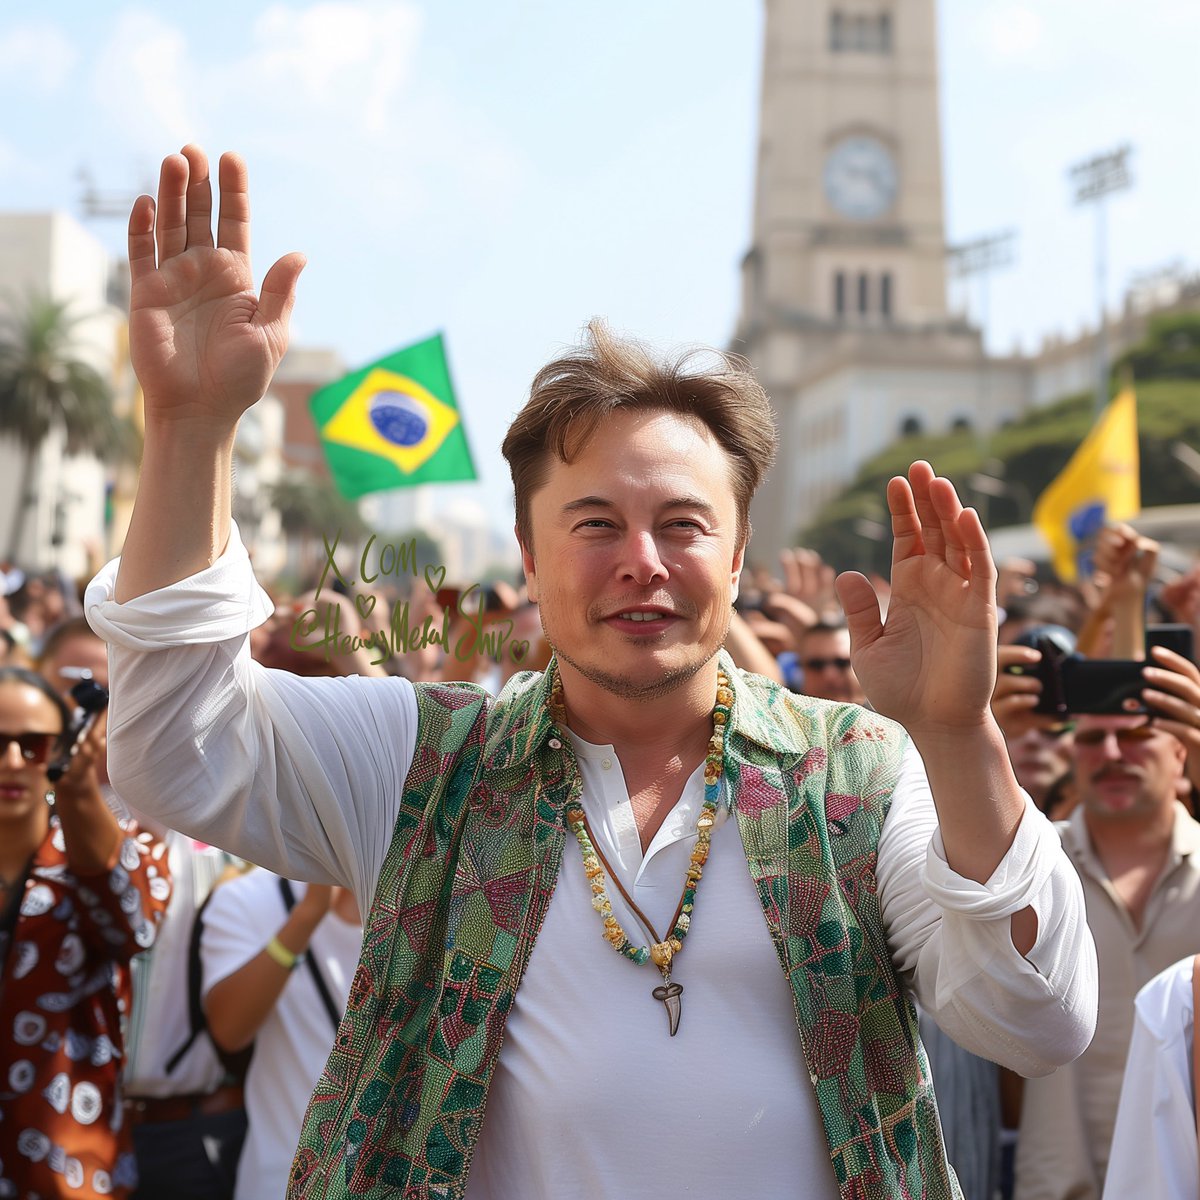 The people of Brazil stand behind @elonmusk and cheer him on from the comment section under his posts on 𝕏. 🇧🇷 Elon shared this message: “𝕏 supports the people of Brazil, without regard to political affiliation.”